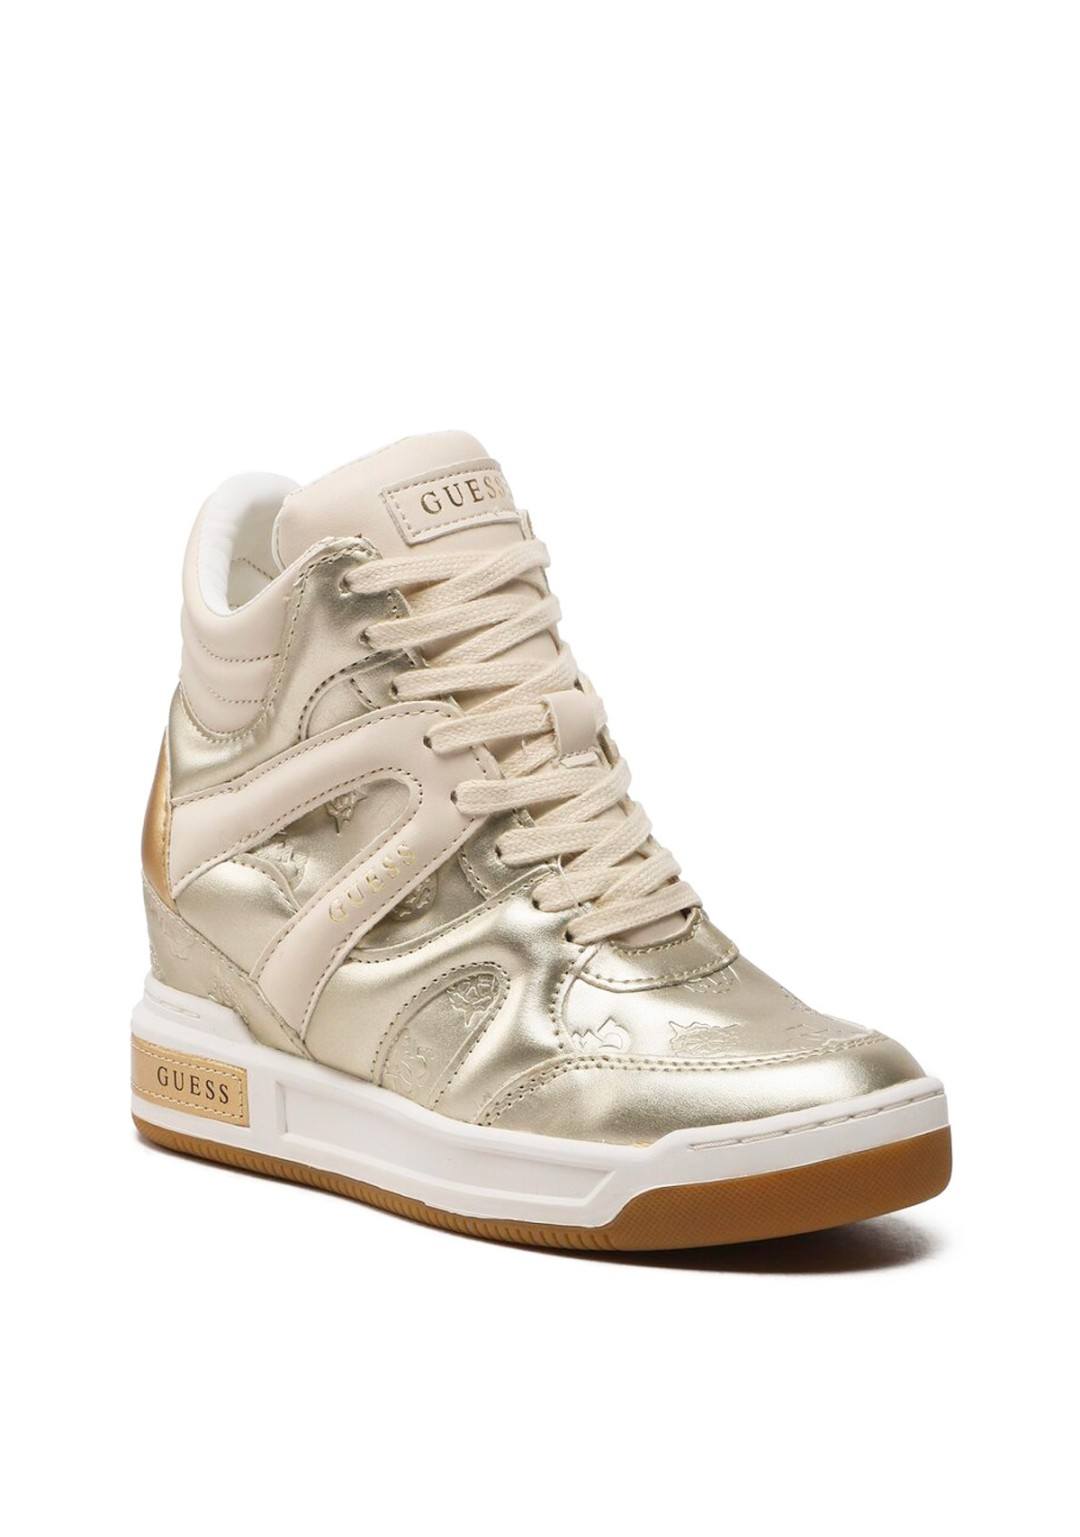 Guess - Sneakers Zeppa - Donna - FL5LISFAL 12